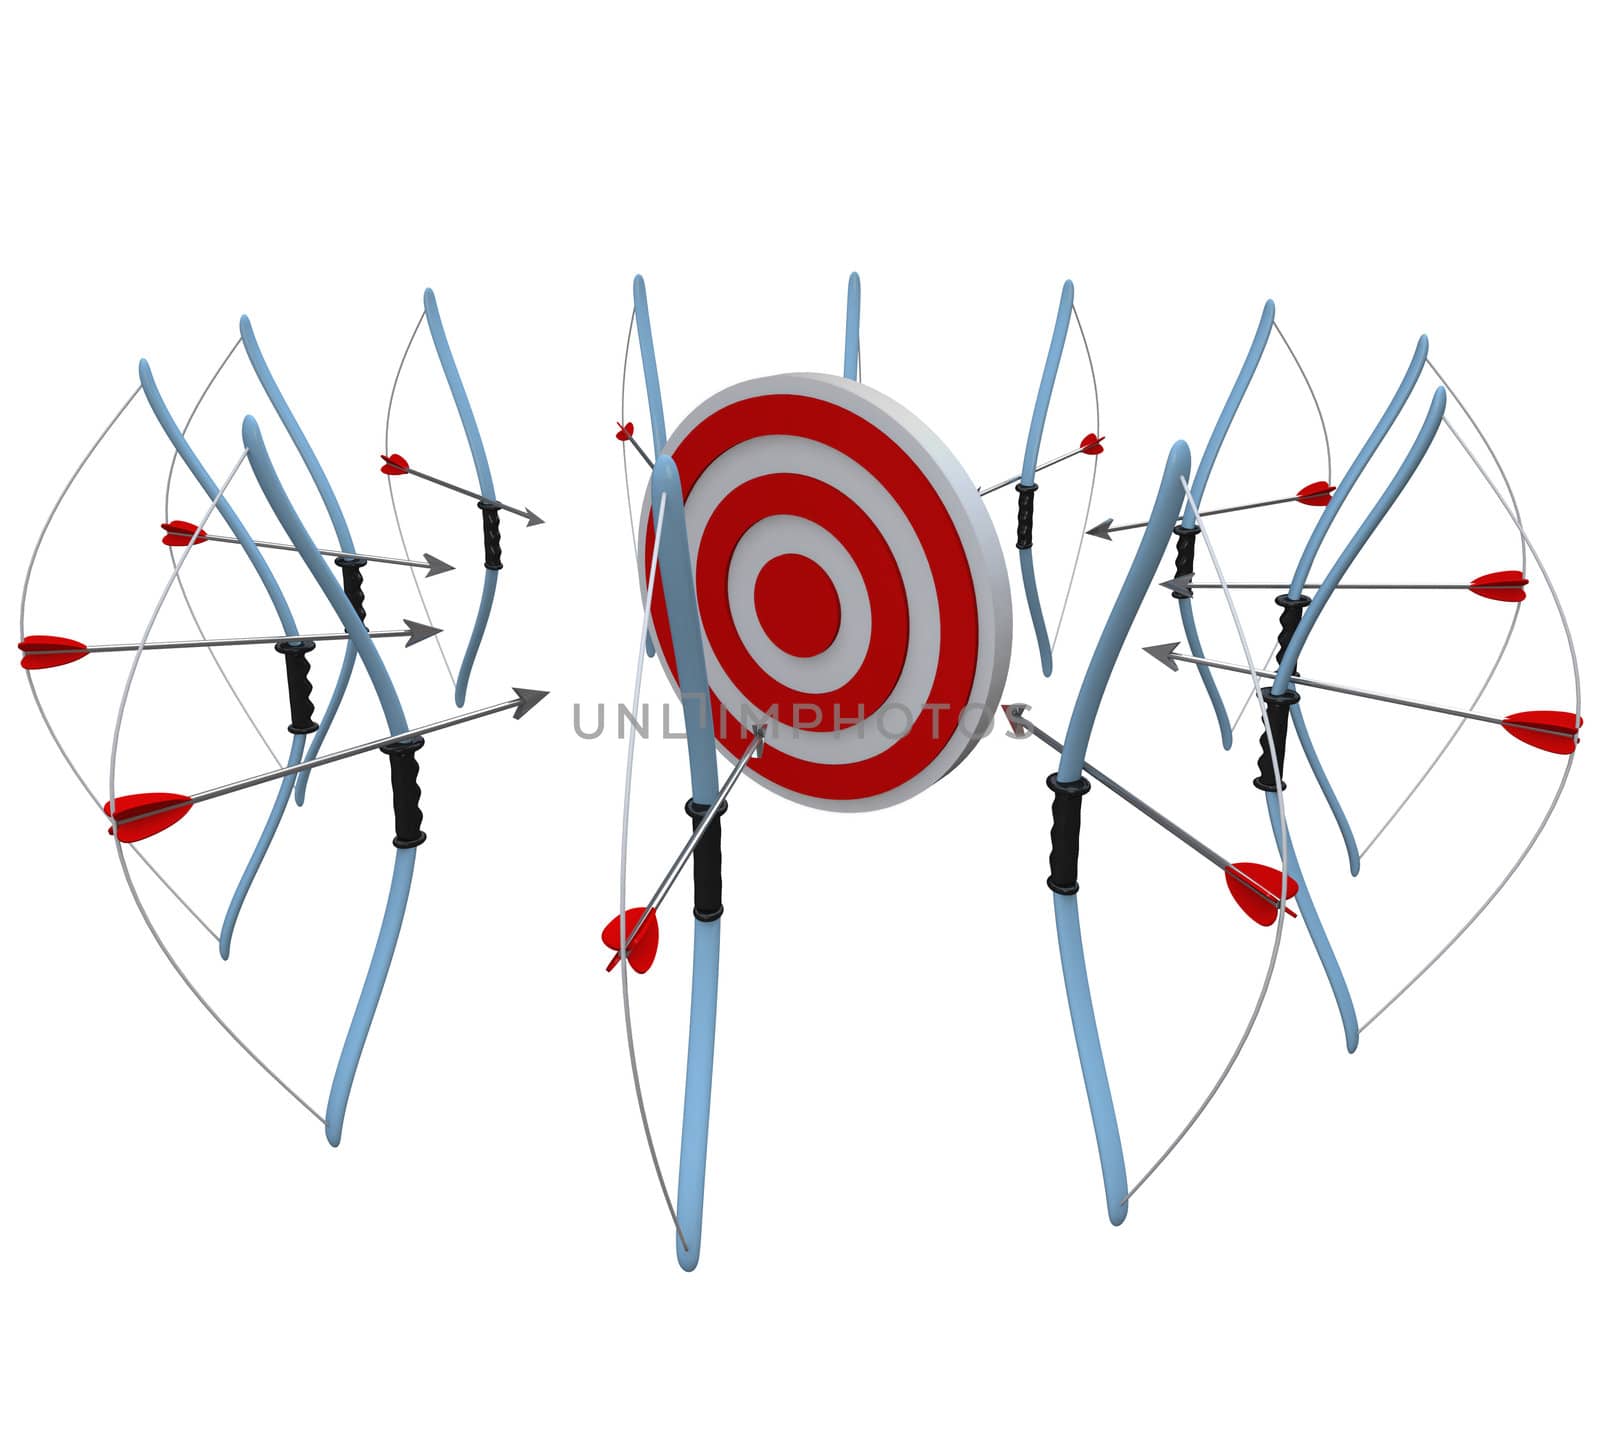 Many bows and arrows all aim at the same target, hoping to get a bulls-eye in the competition that decides who is best or who will win the customer in business